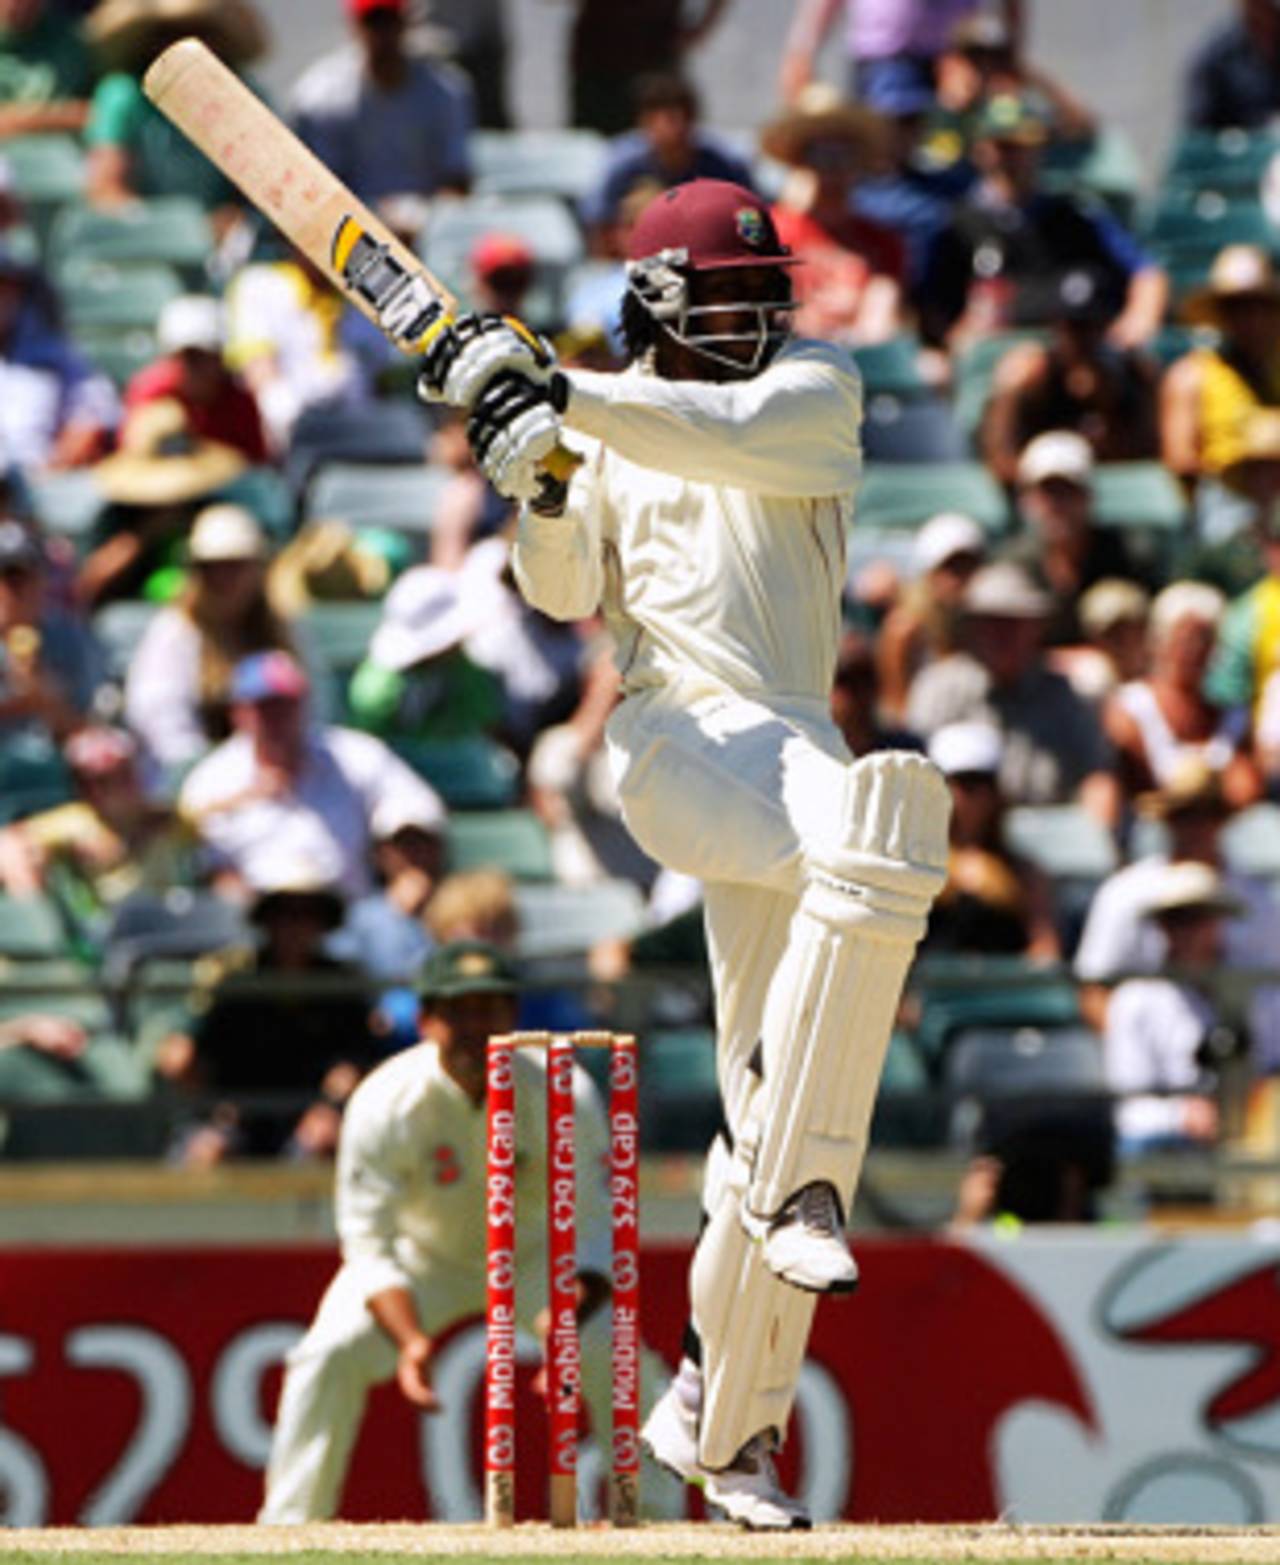 Chris Gayle's back-to-back centuries in Adelaide and Perth were part of an admirable fightback after a debacle in the opening Test in Brisbane&nbsp;&nbsp;&bull;&nbsp;&nbsp;Getty Images